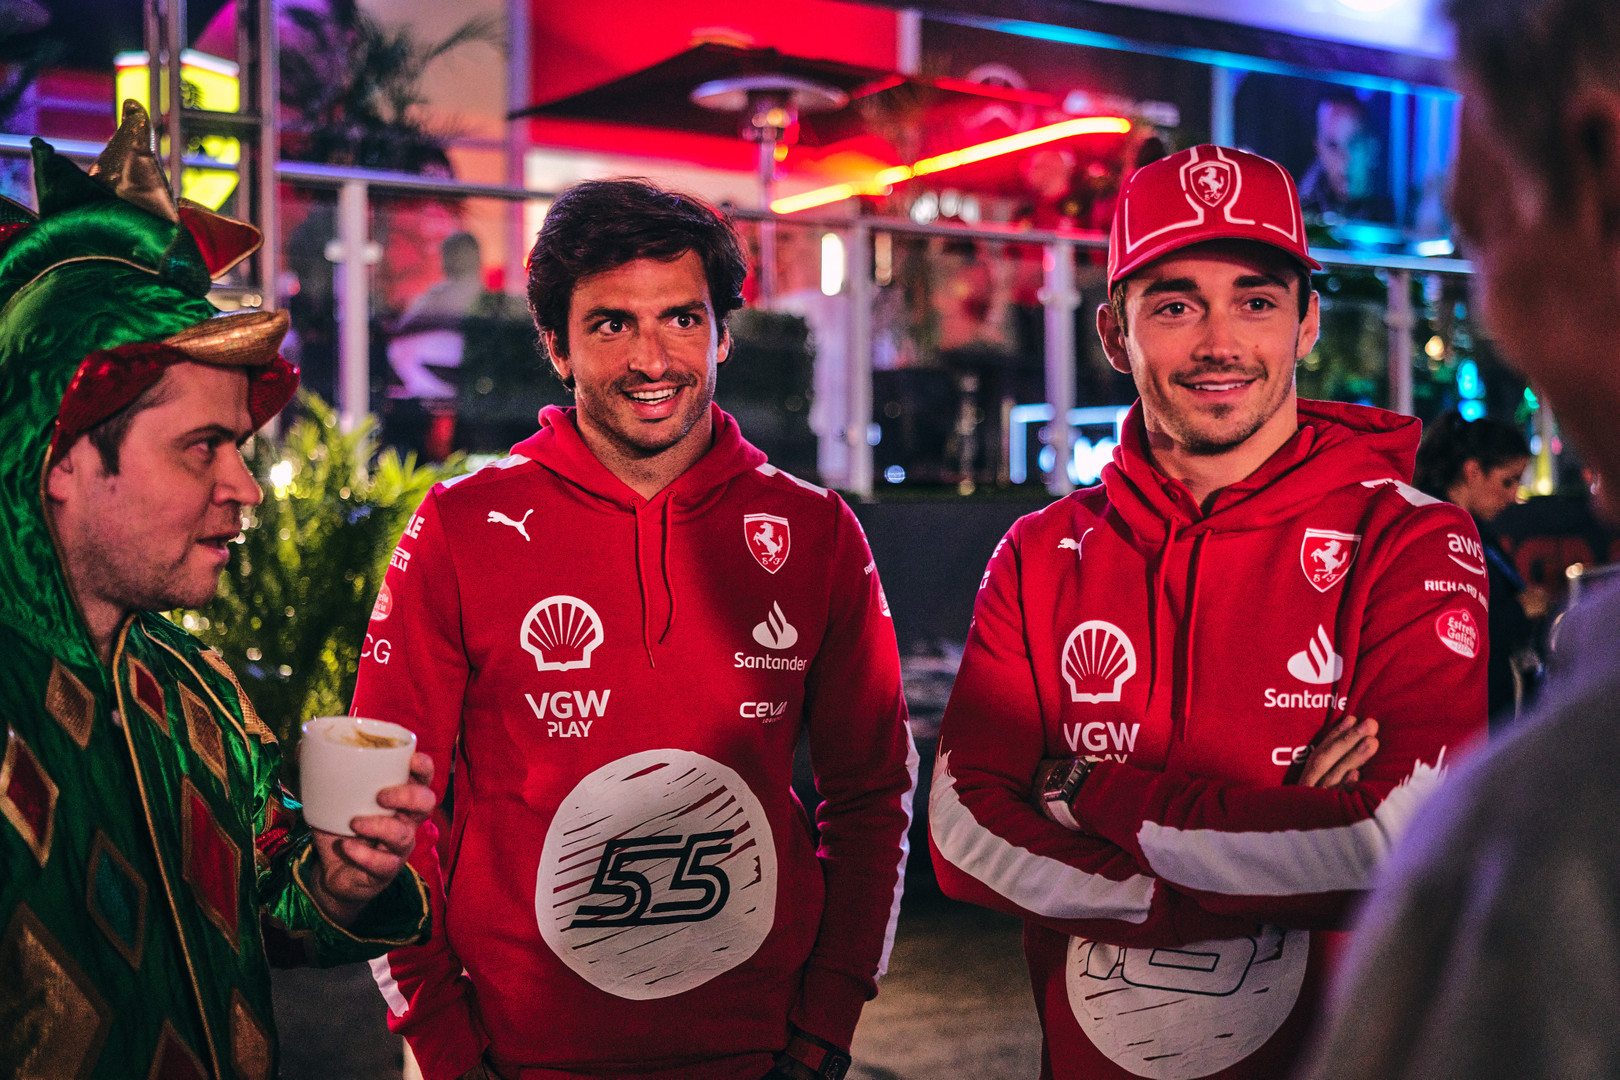 Carlos Sainz (middle) and Charles Leclerc (right) of Ferrari at the Las Vegas Grand Prix, 2023